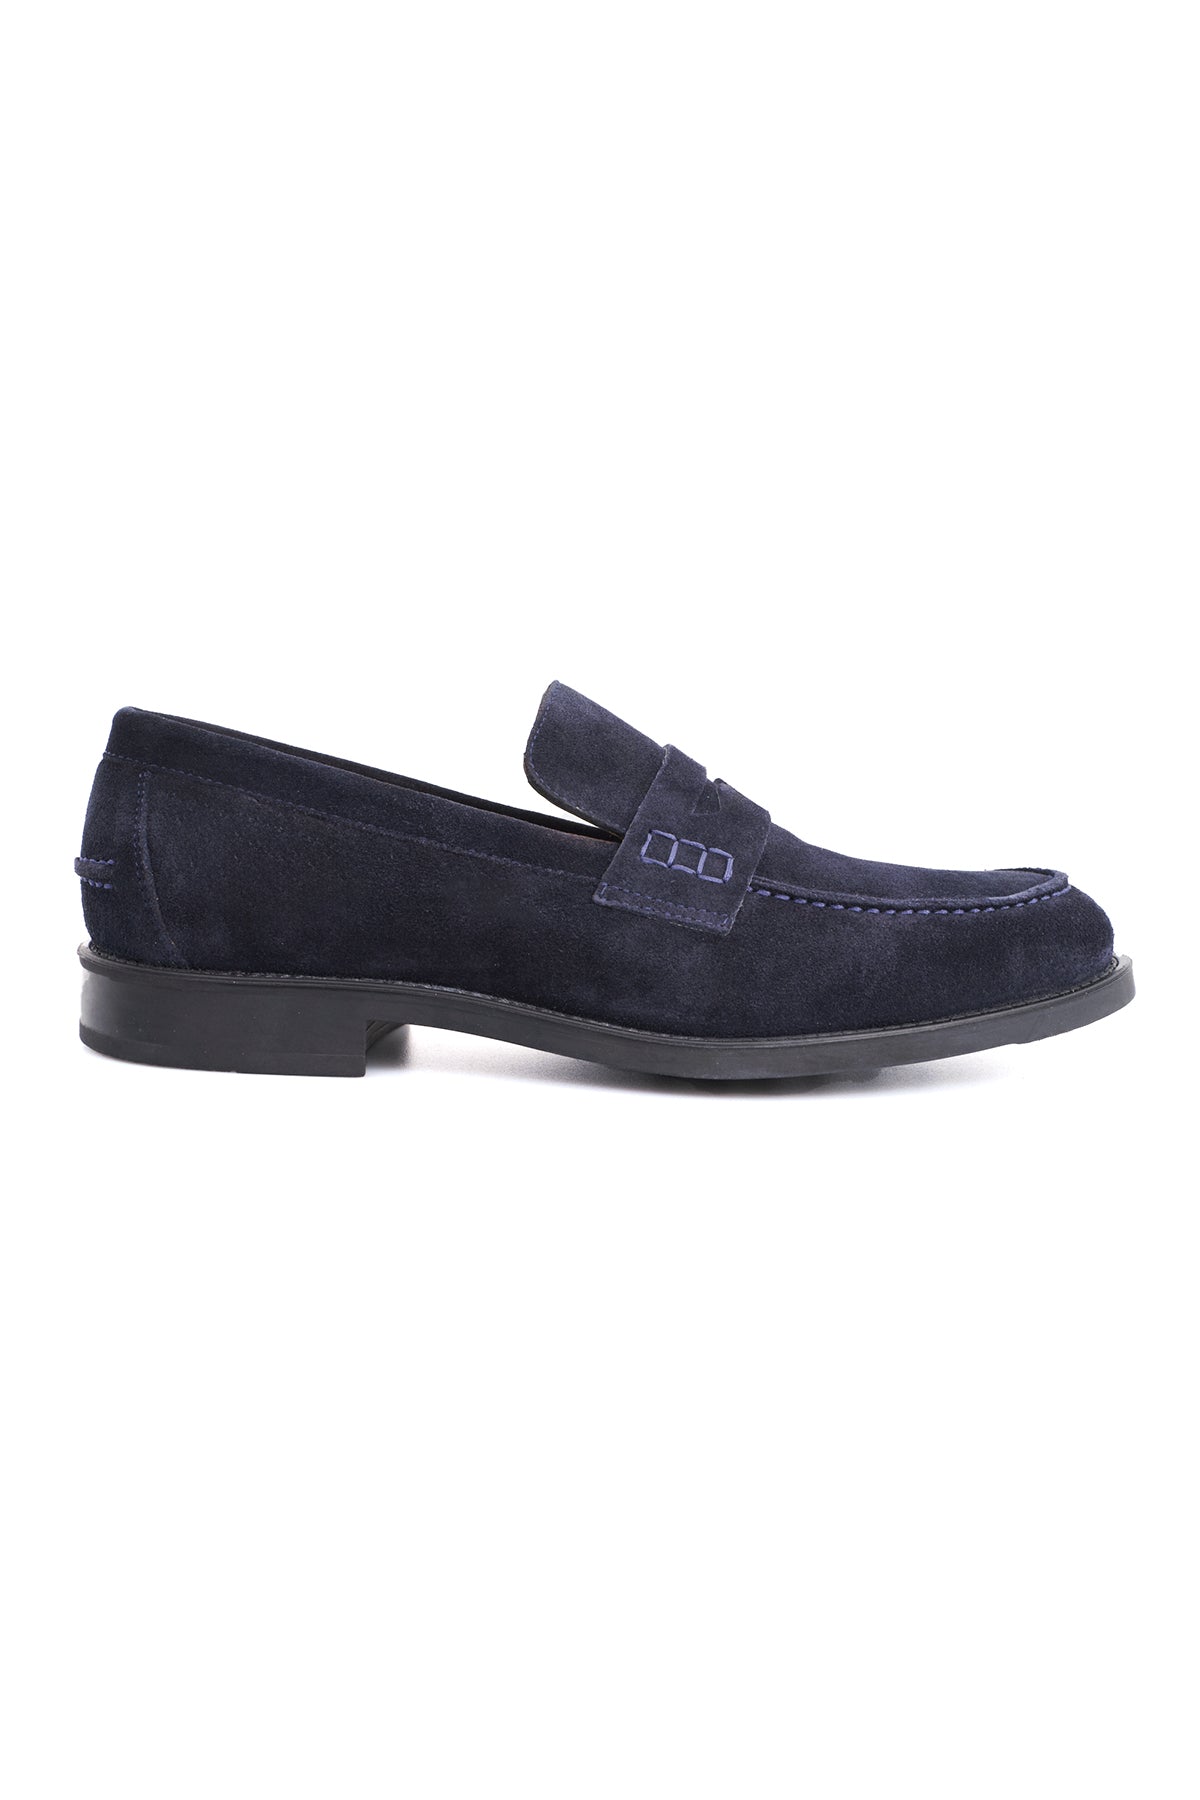 SUEDE PENNY LOAFERS ΜΠΛΕ.